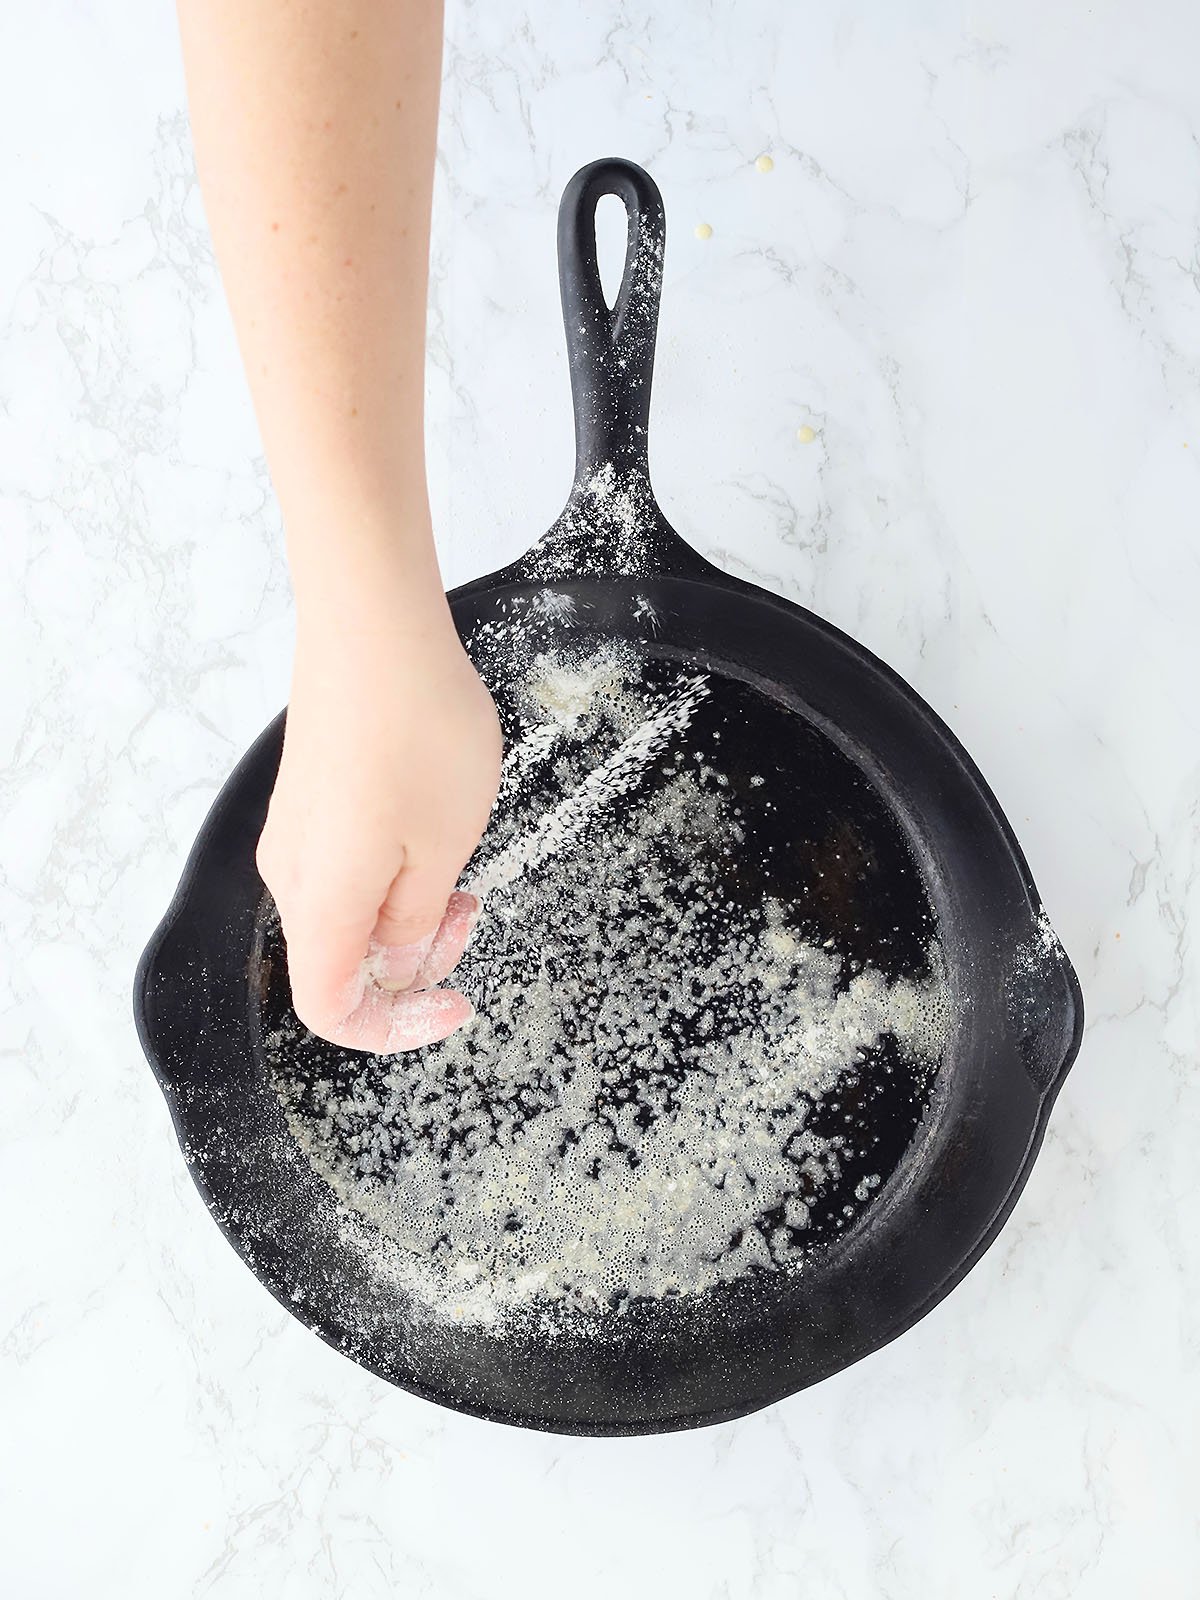 Hand sprinkling flour onto a greased cast iron skillet.